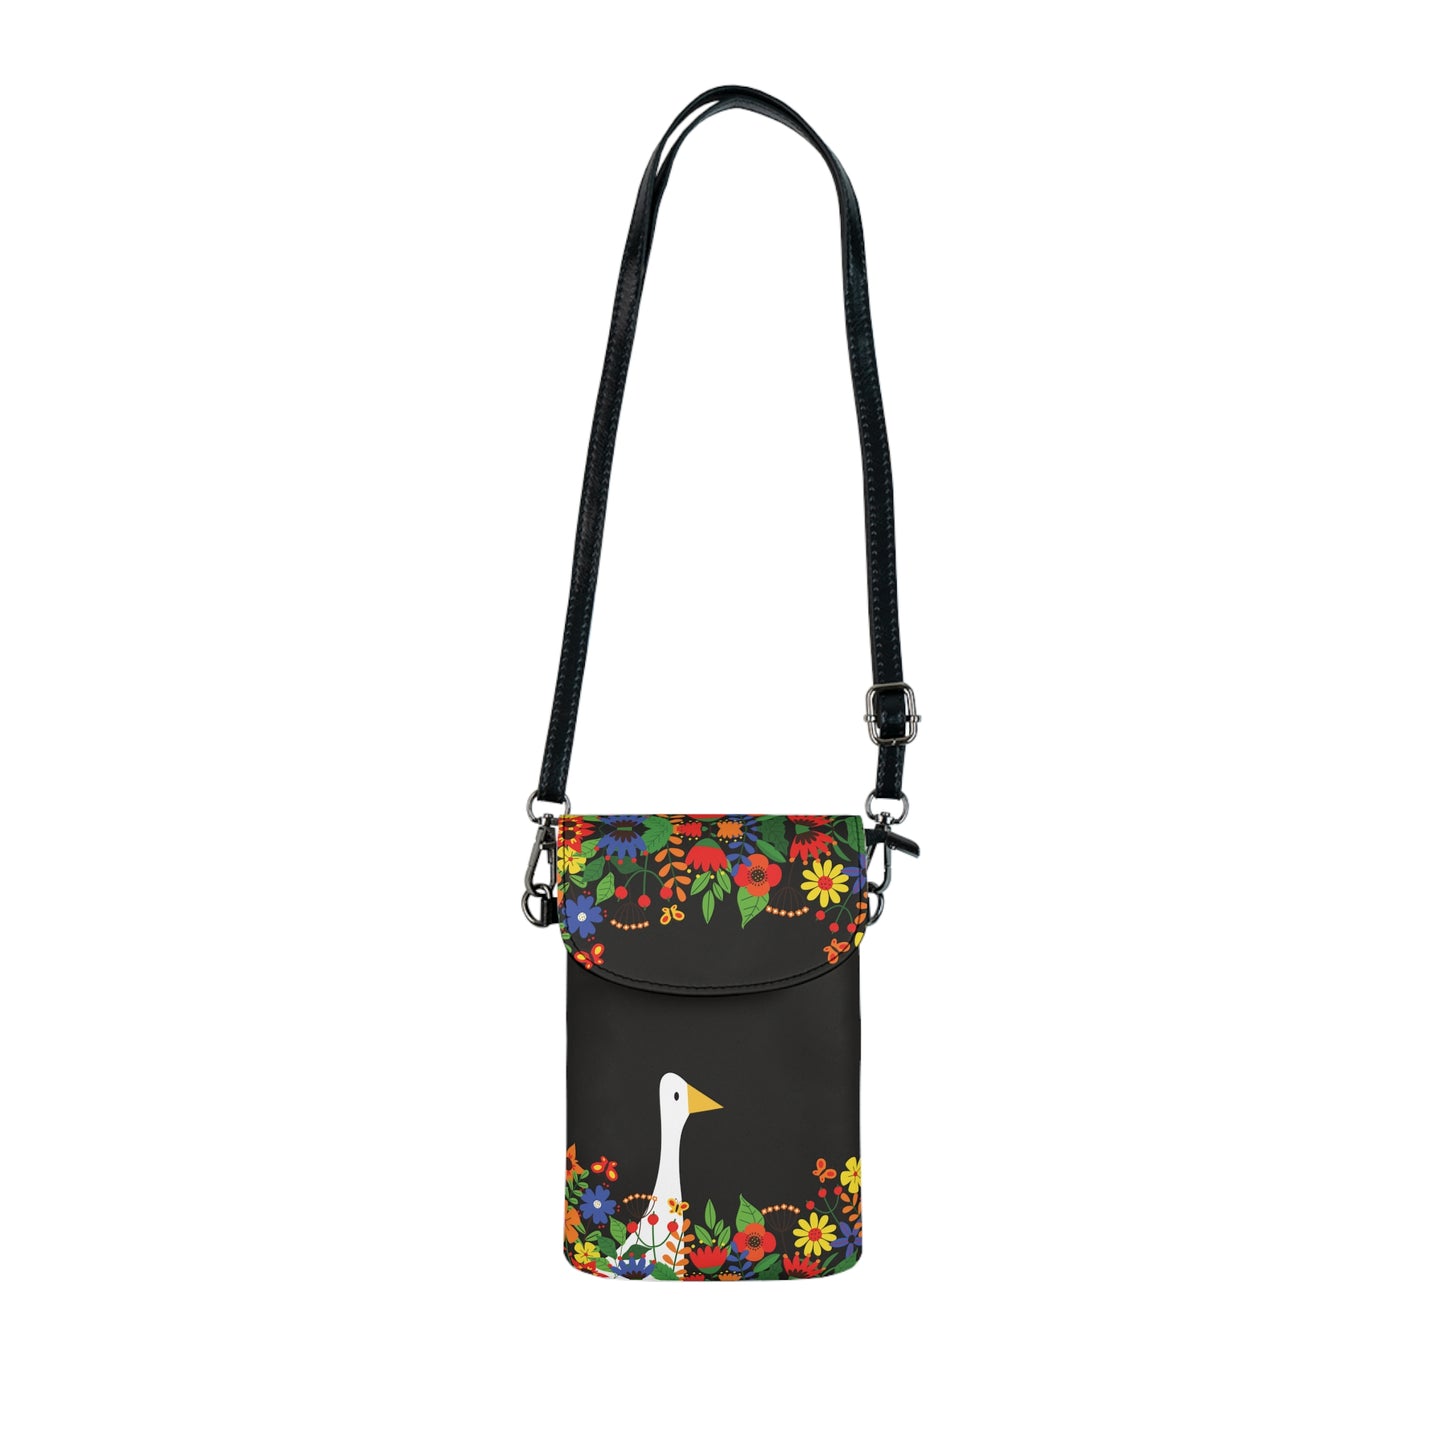 Bright Summer flowers - Black Chocolate 191815 - Small Cell Phone Wallet